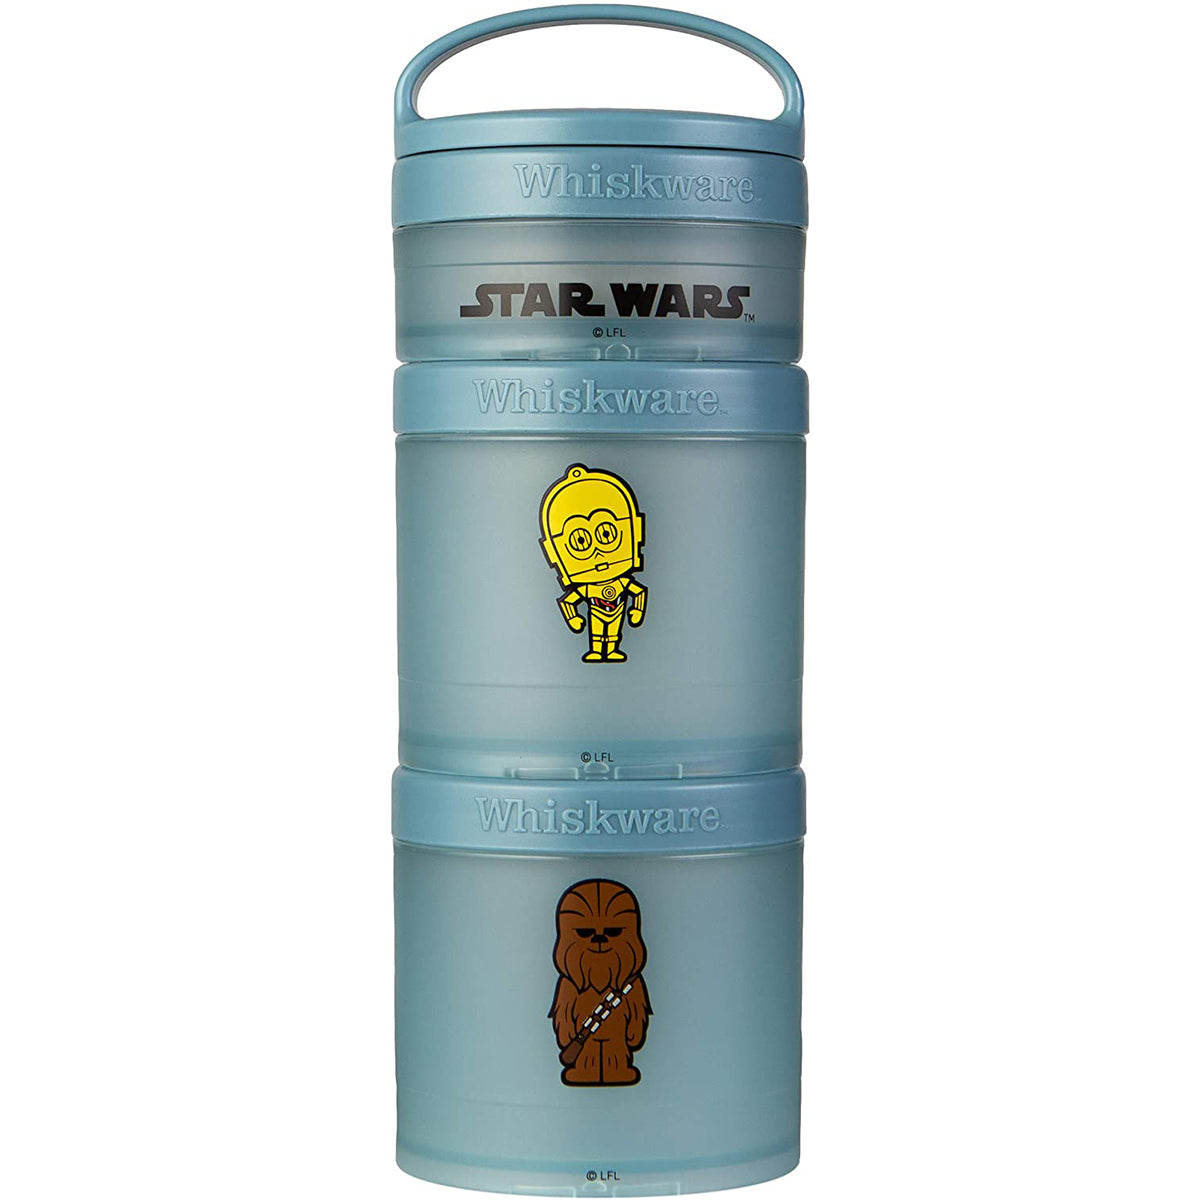 Whiskware Disney Stackable Snack Pack Containers - Belle & Chip